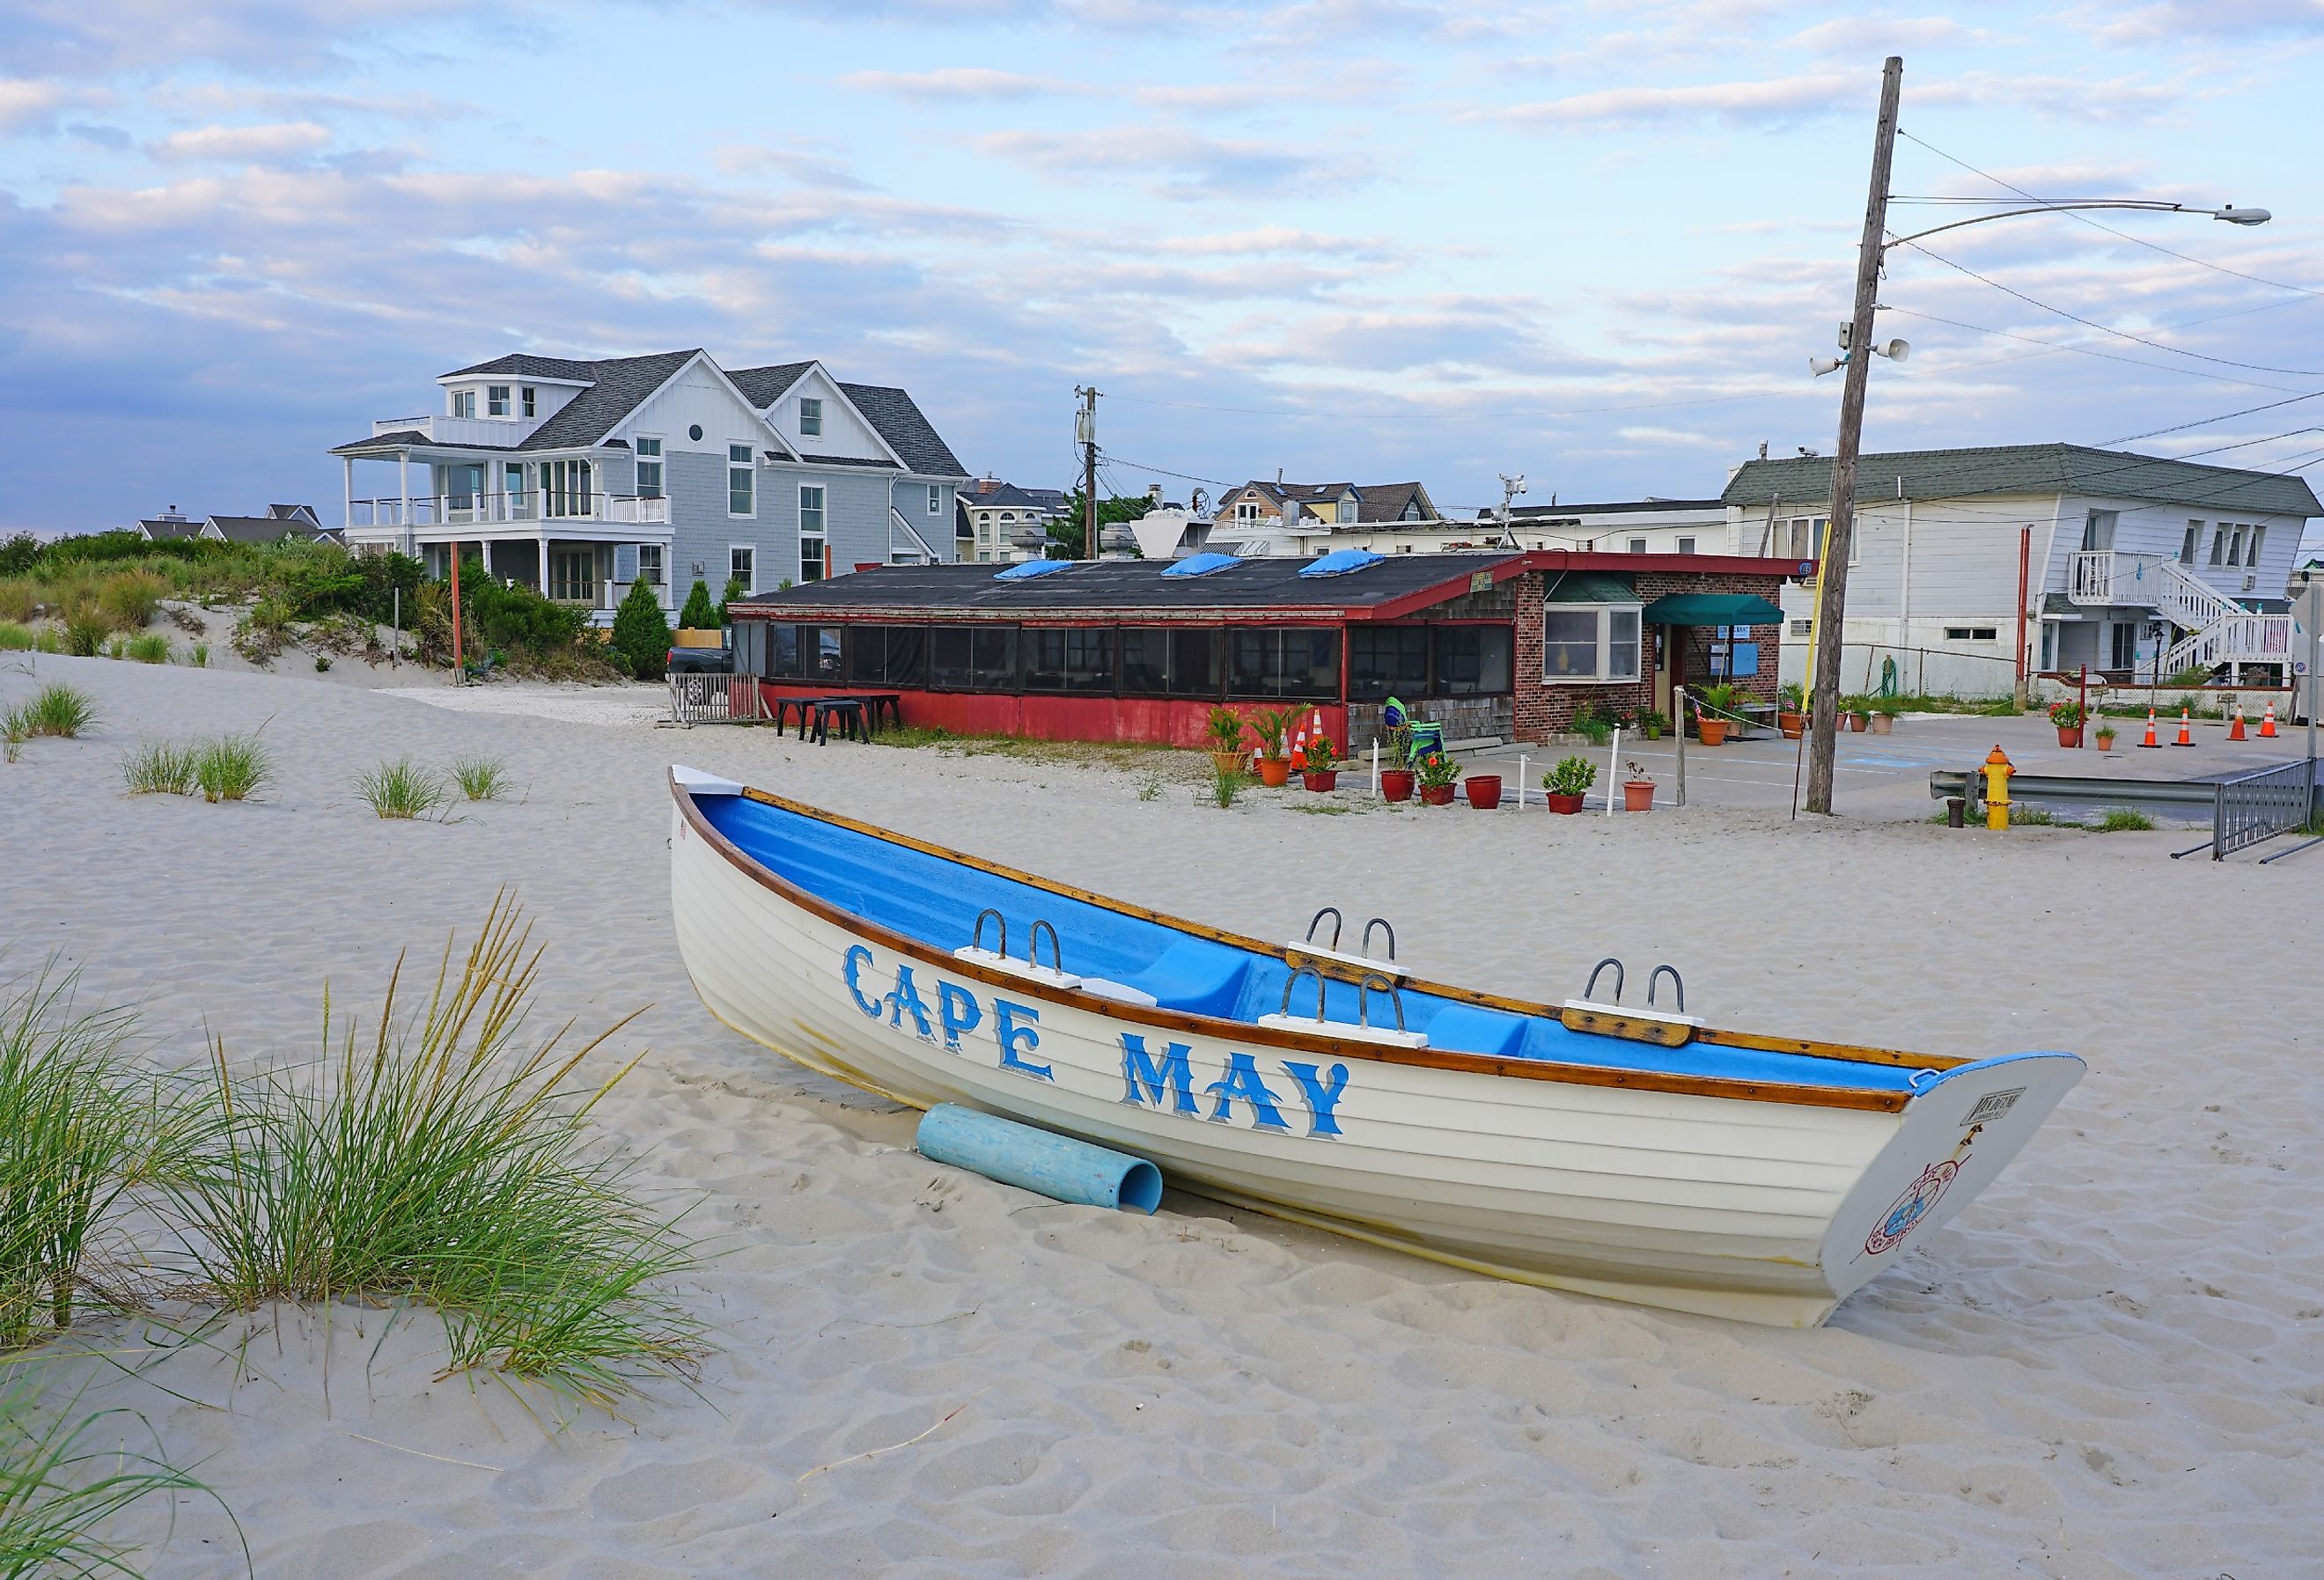 Cape May sign on the beach in Cape May, New Jersey. Image credit EQRoy via Shutterstock